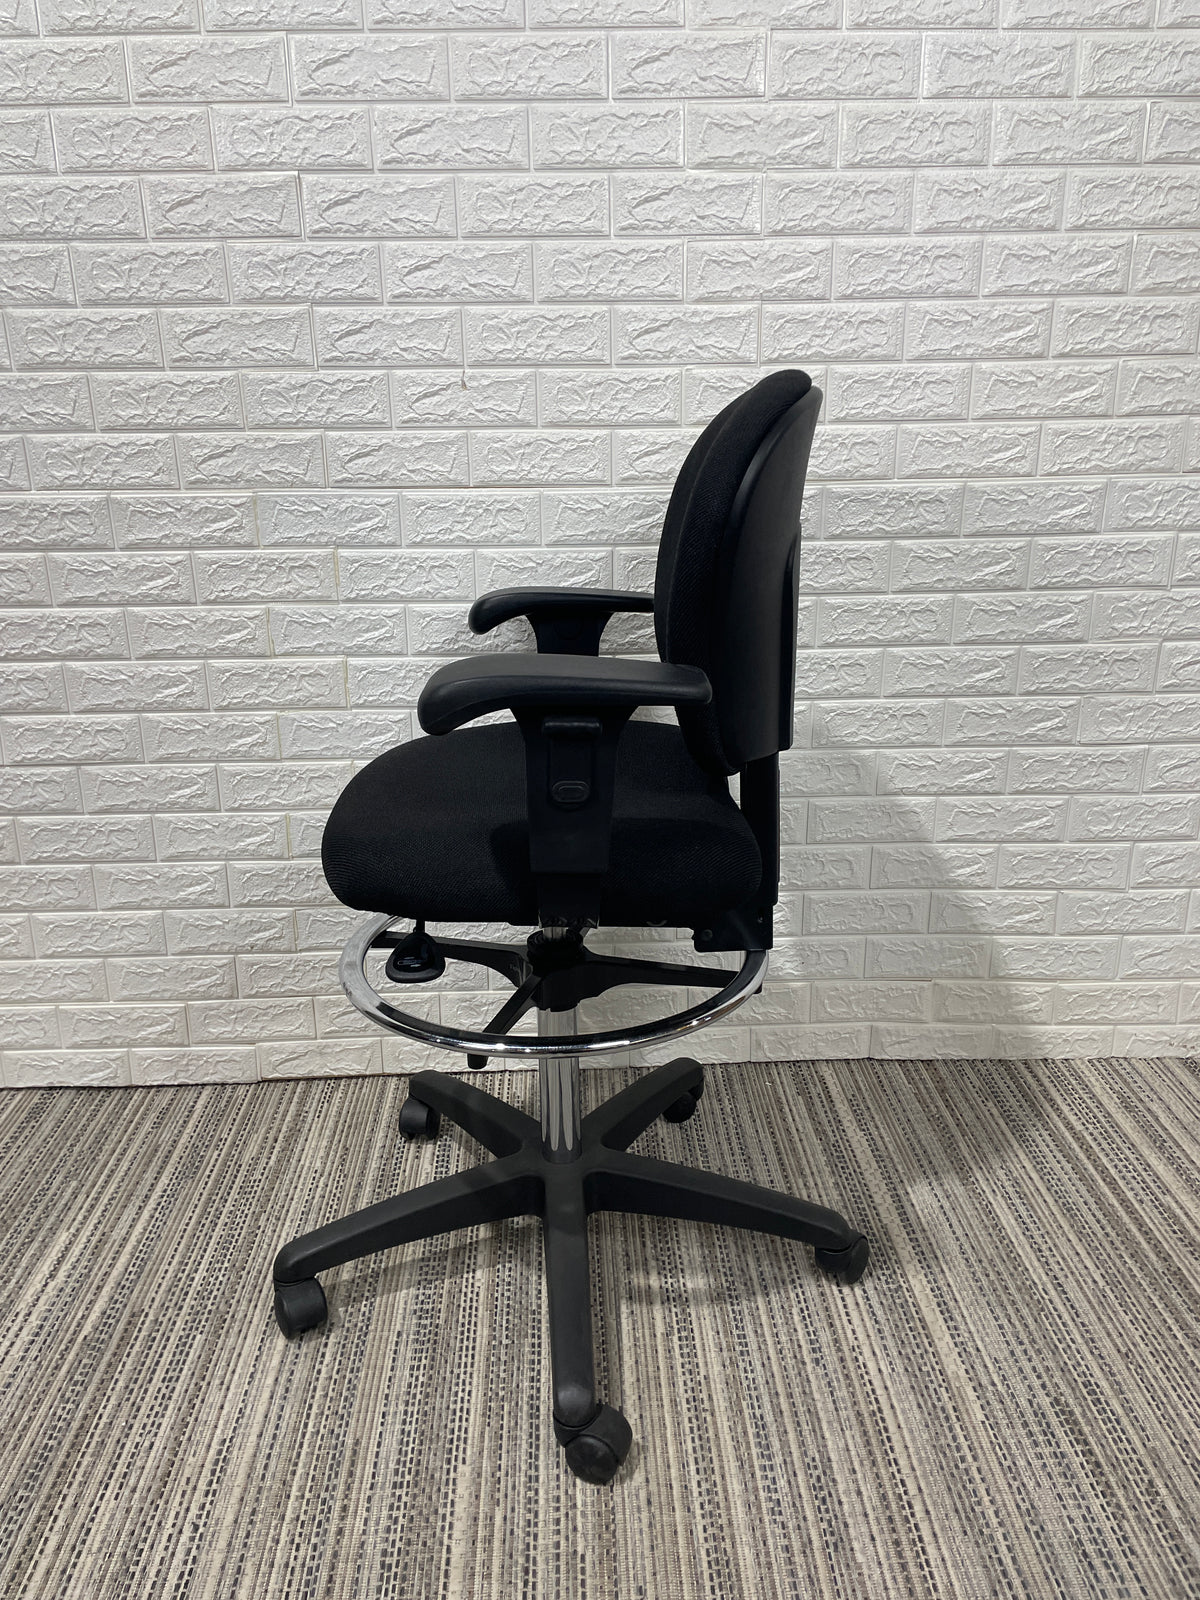 Pre-Owned Black Task Stool - Duckys Office Furniture